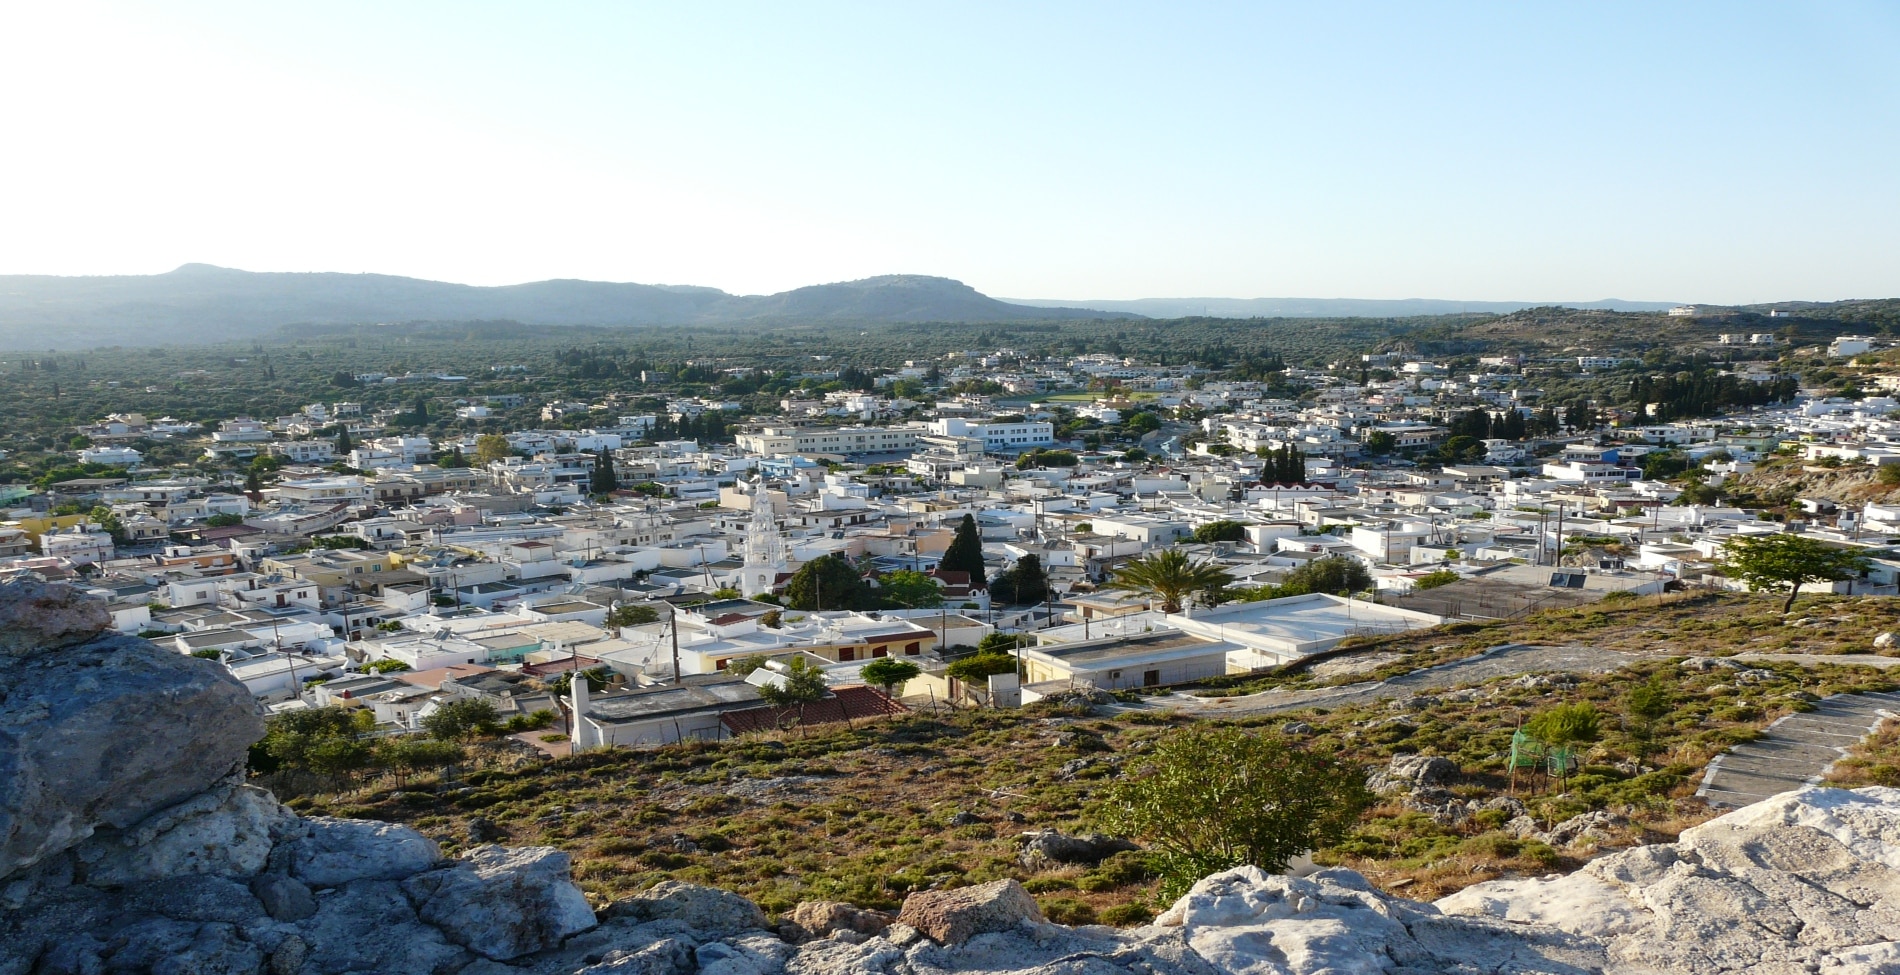 The Greek village that has its own distinct dialect